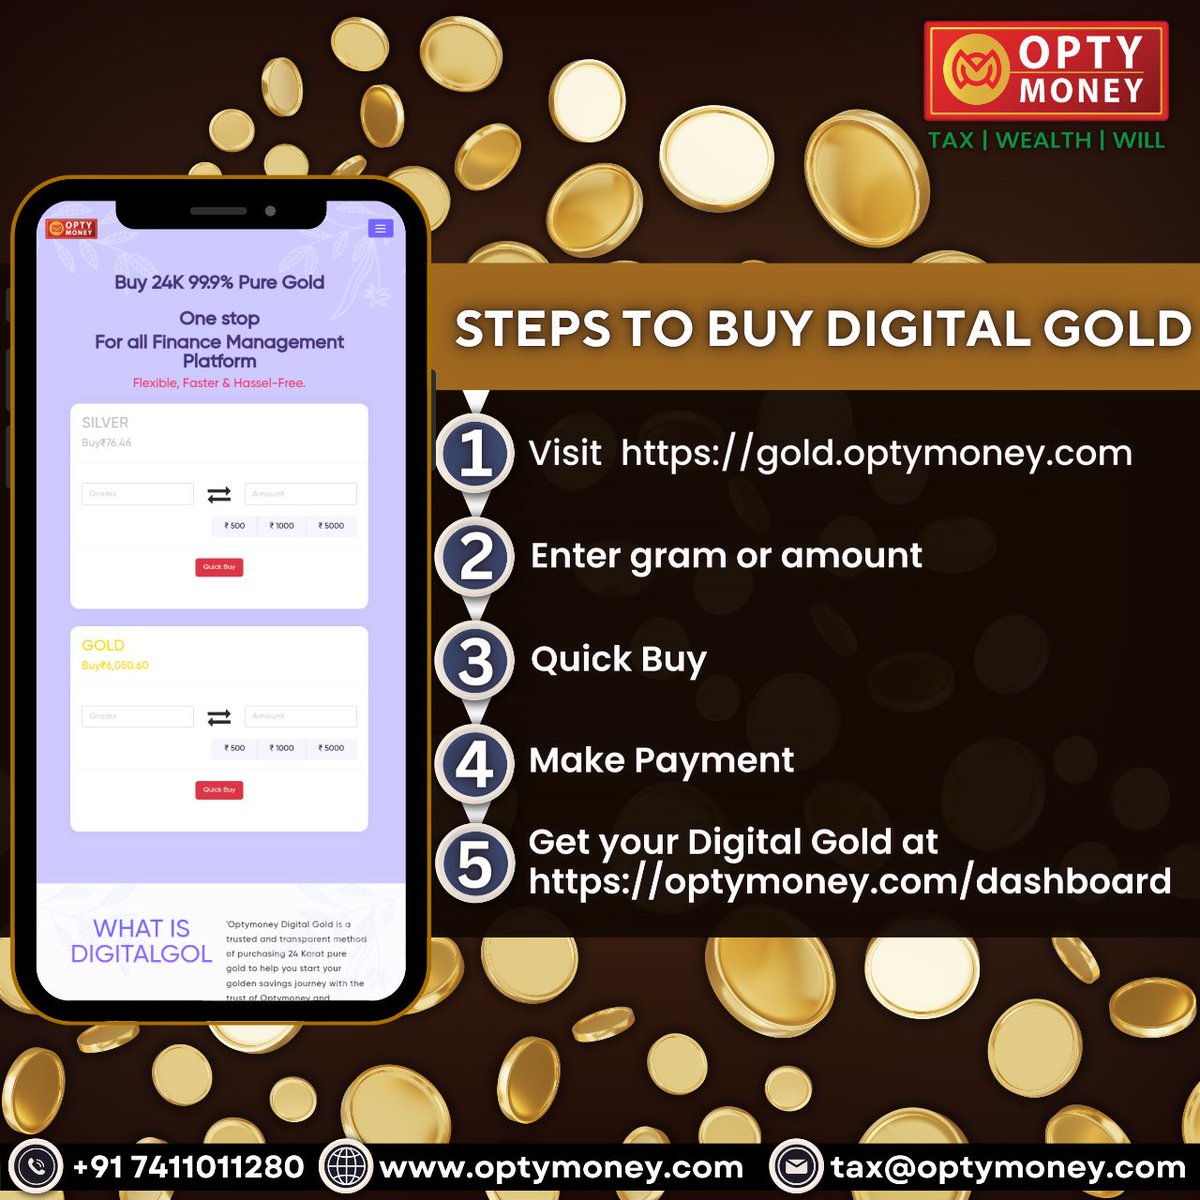 🔥 Discover the Digital Gold! 🔥
gold.optymoney.com/home
🌟 Join the Future of Investments! 🌟

Reach out to us at +91 7411011280 
Write to support@optymoney.com.
#DigitalGold #Investment #FinancialFreedom #Optymoney #SecureInvestment